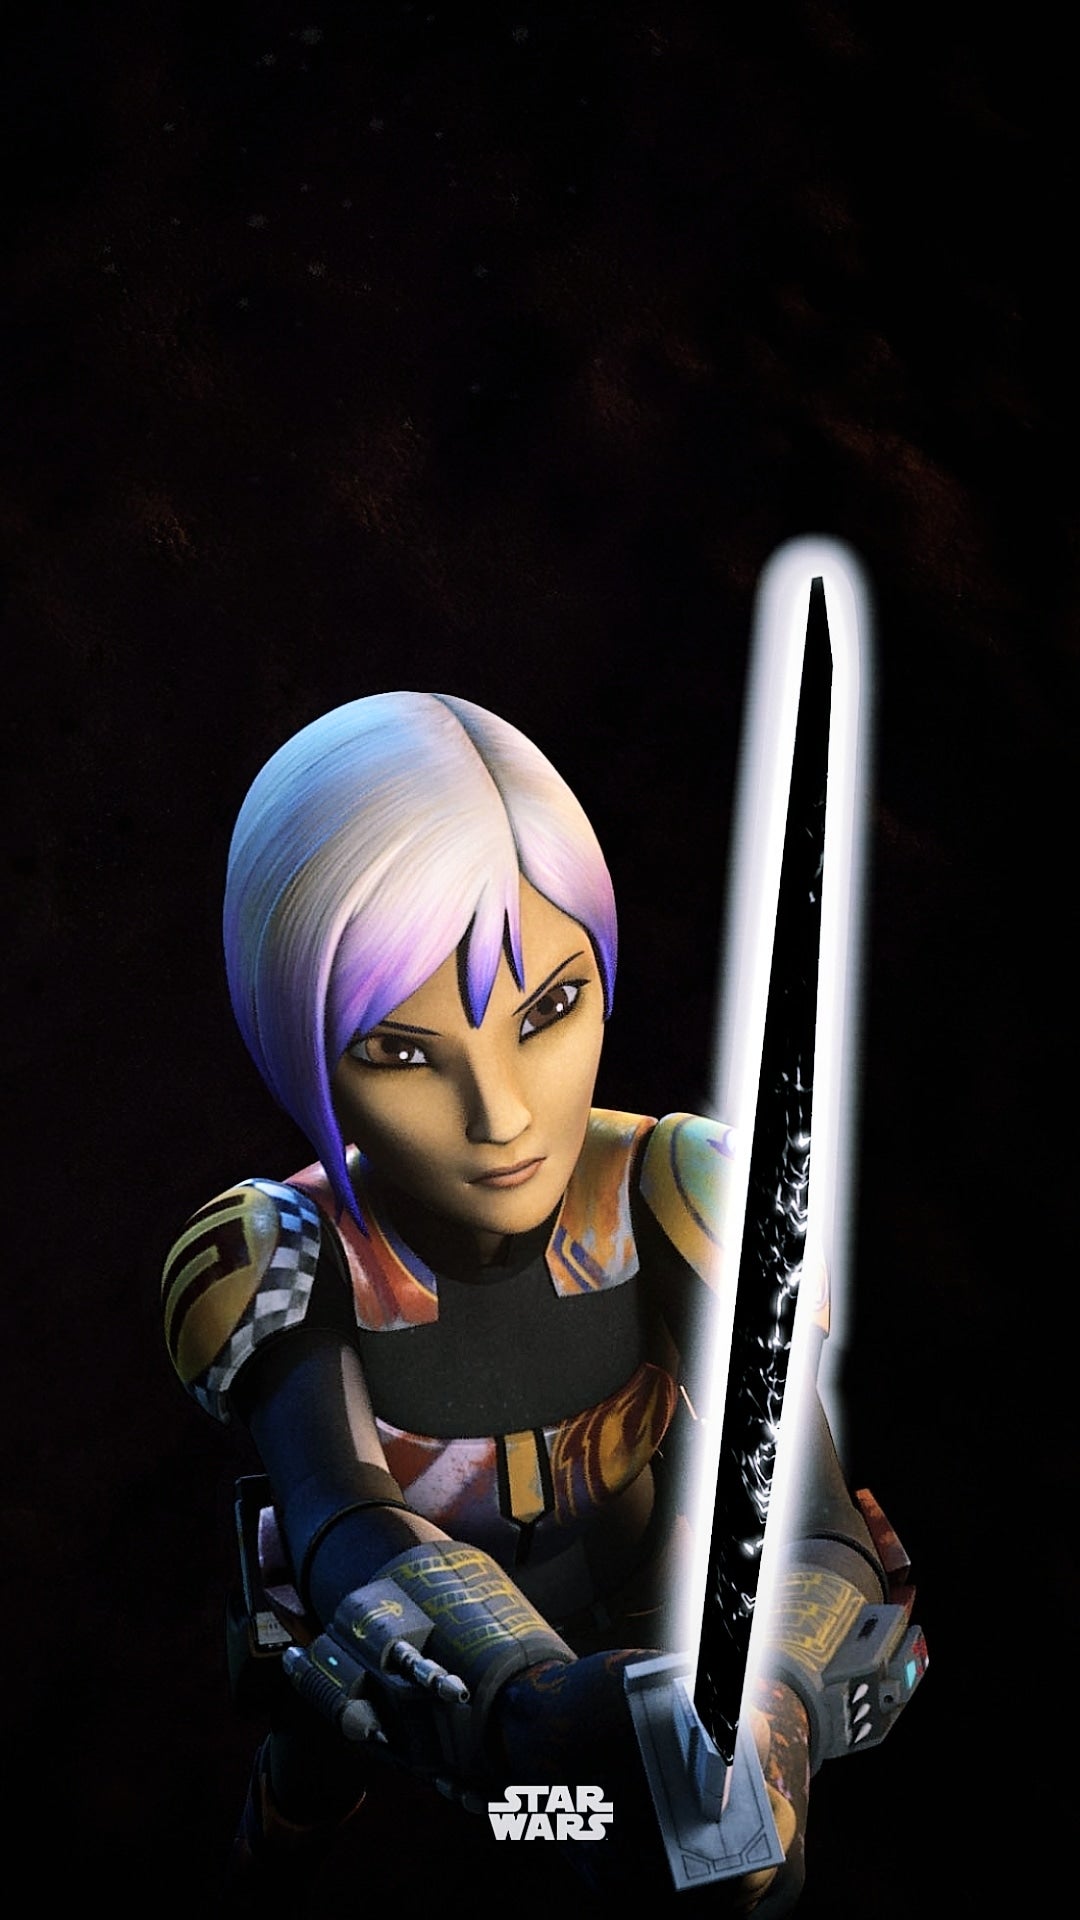 Sabine Wren wallpaper. Posted these for the people who asked for them on another thread, since I didn't know how else to send image on reddit